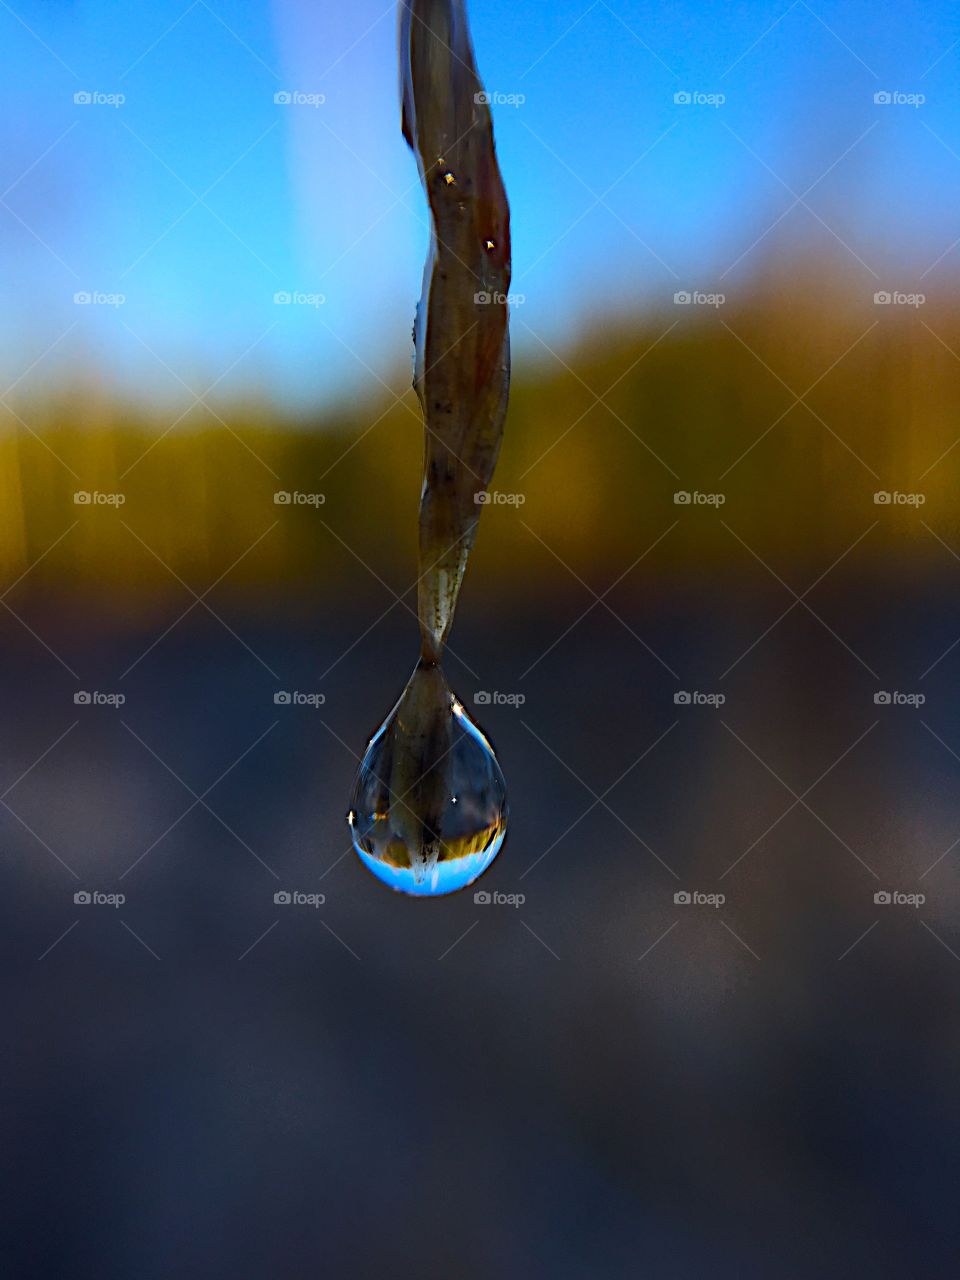 A drop of water 